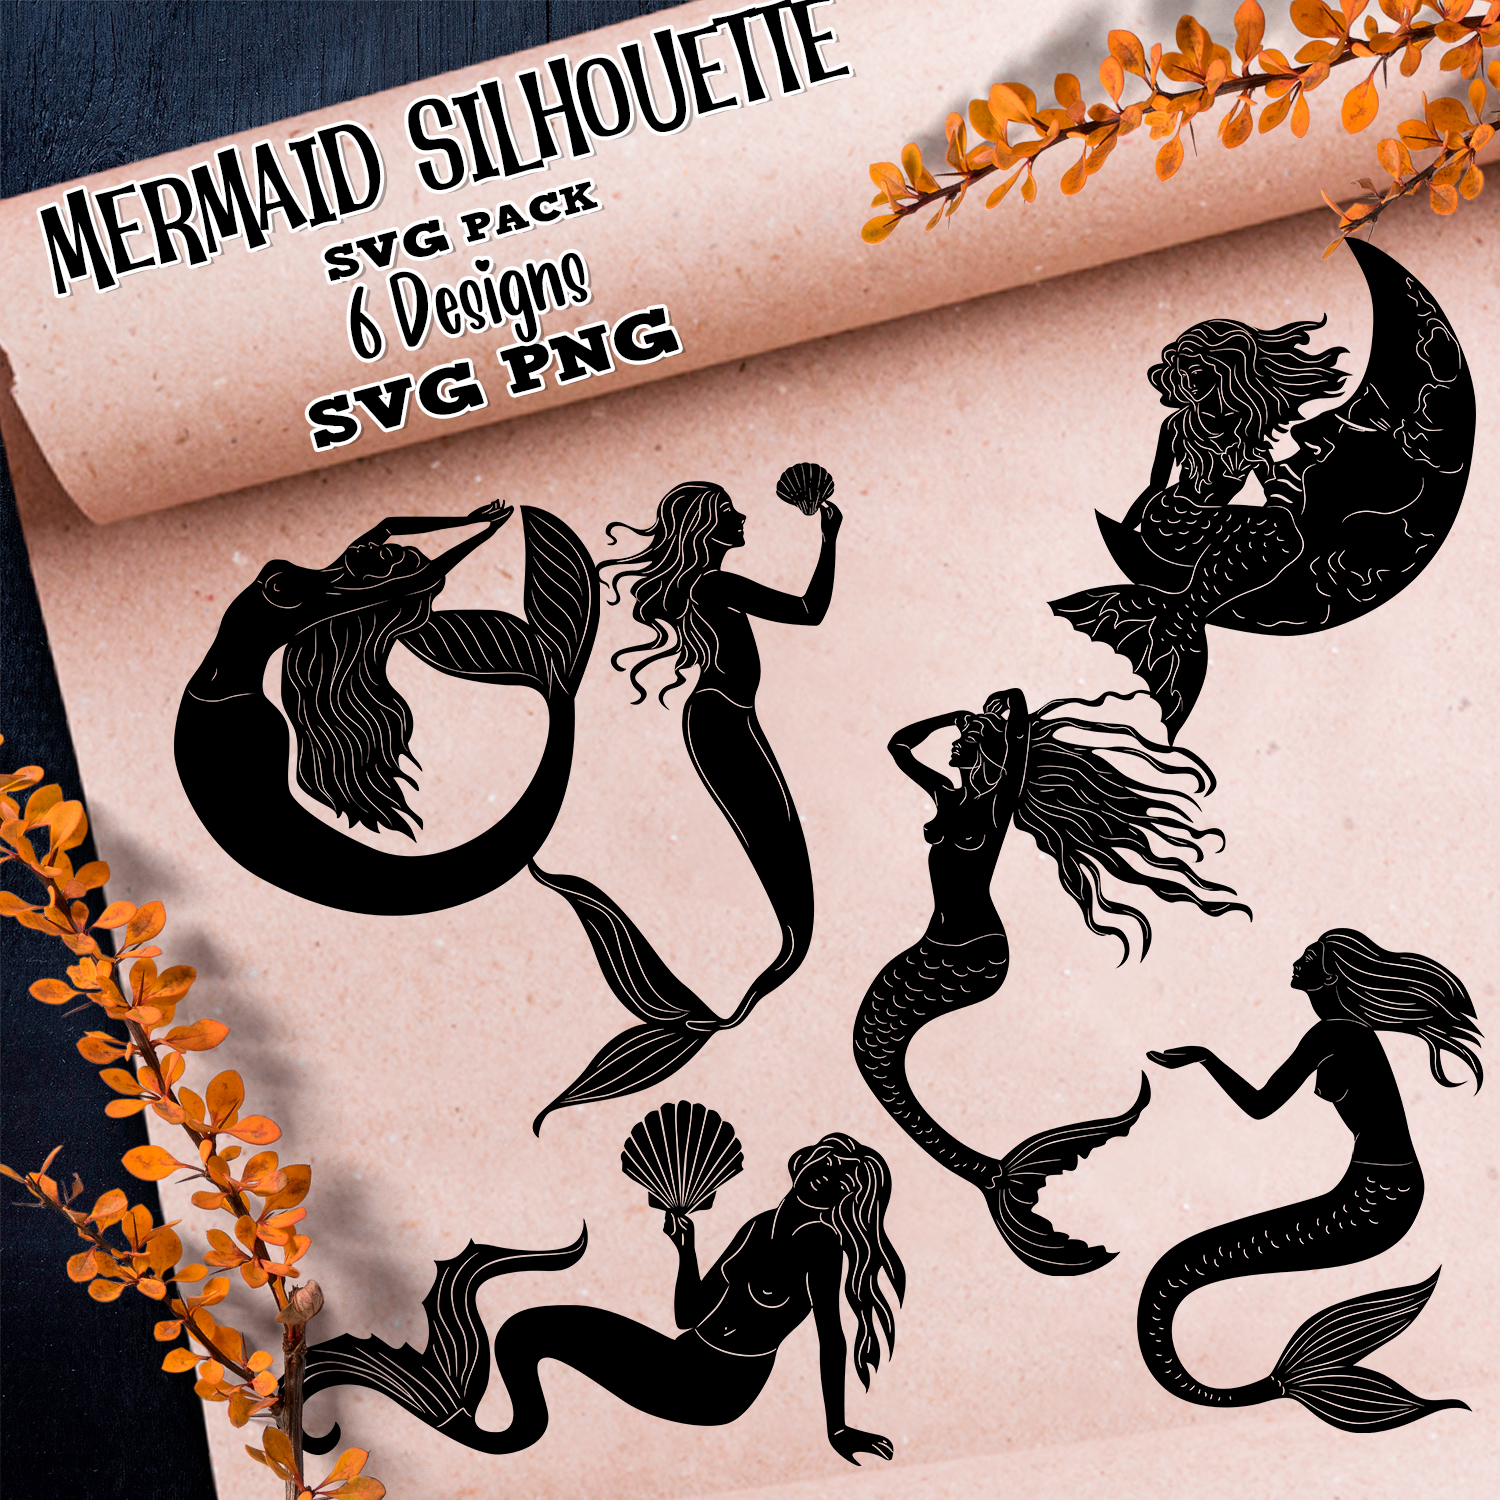 A preview of various mermaids and more.